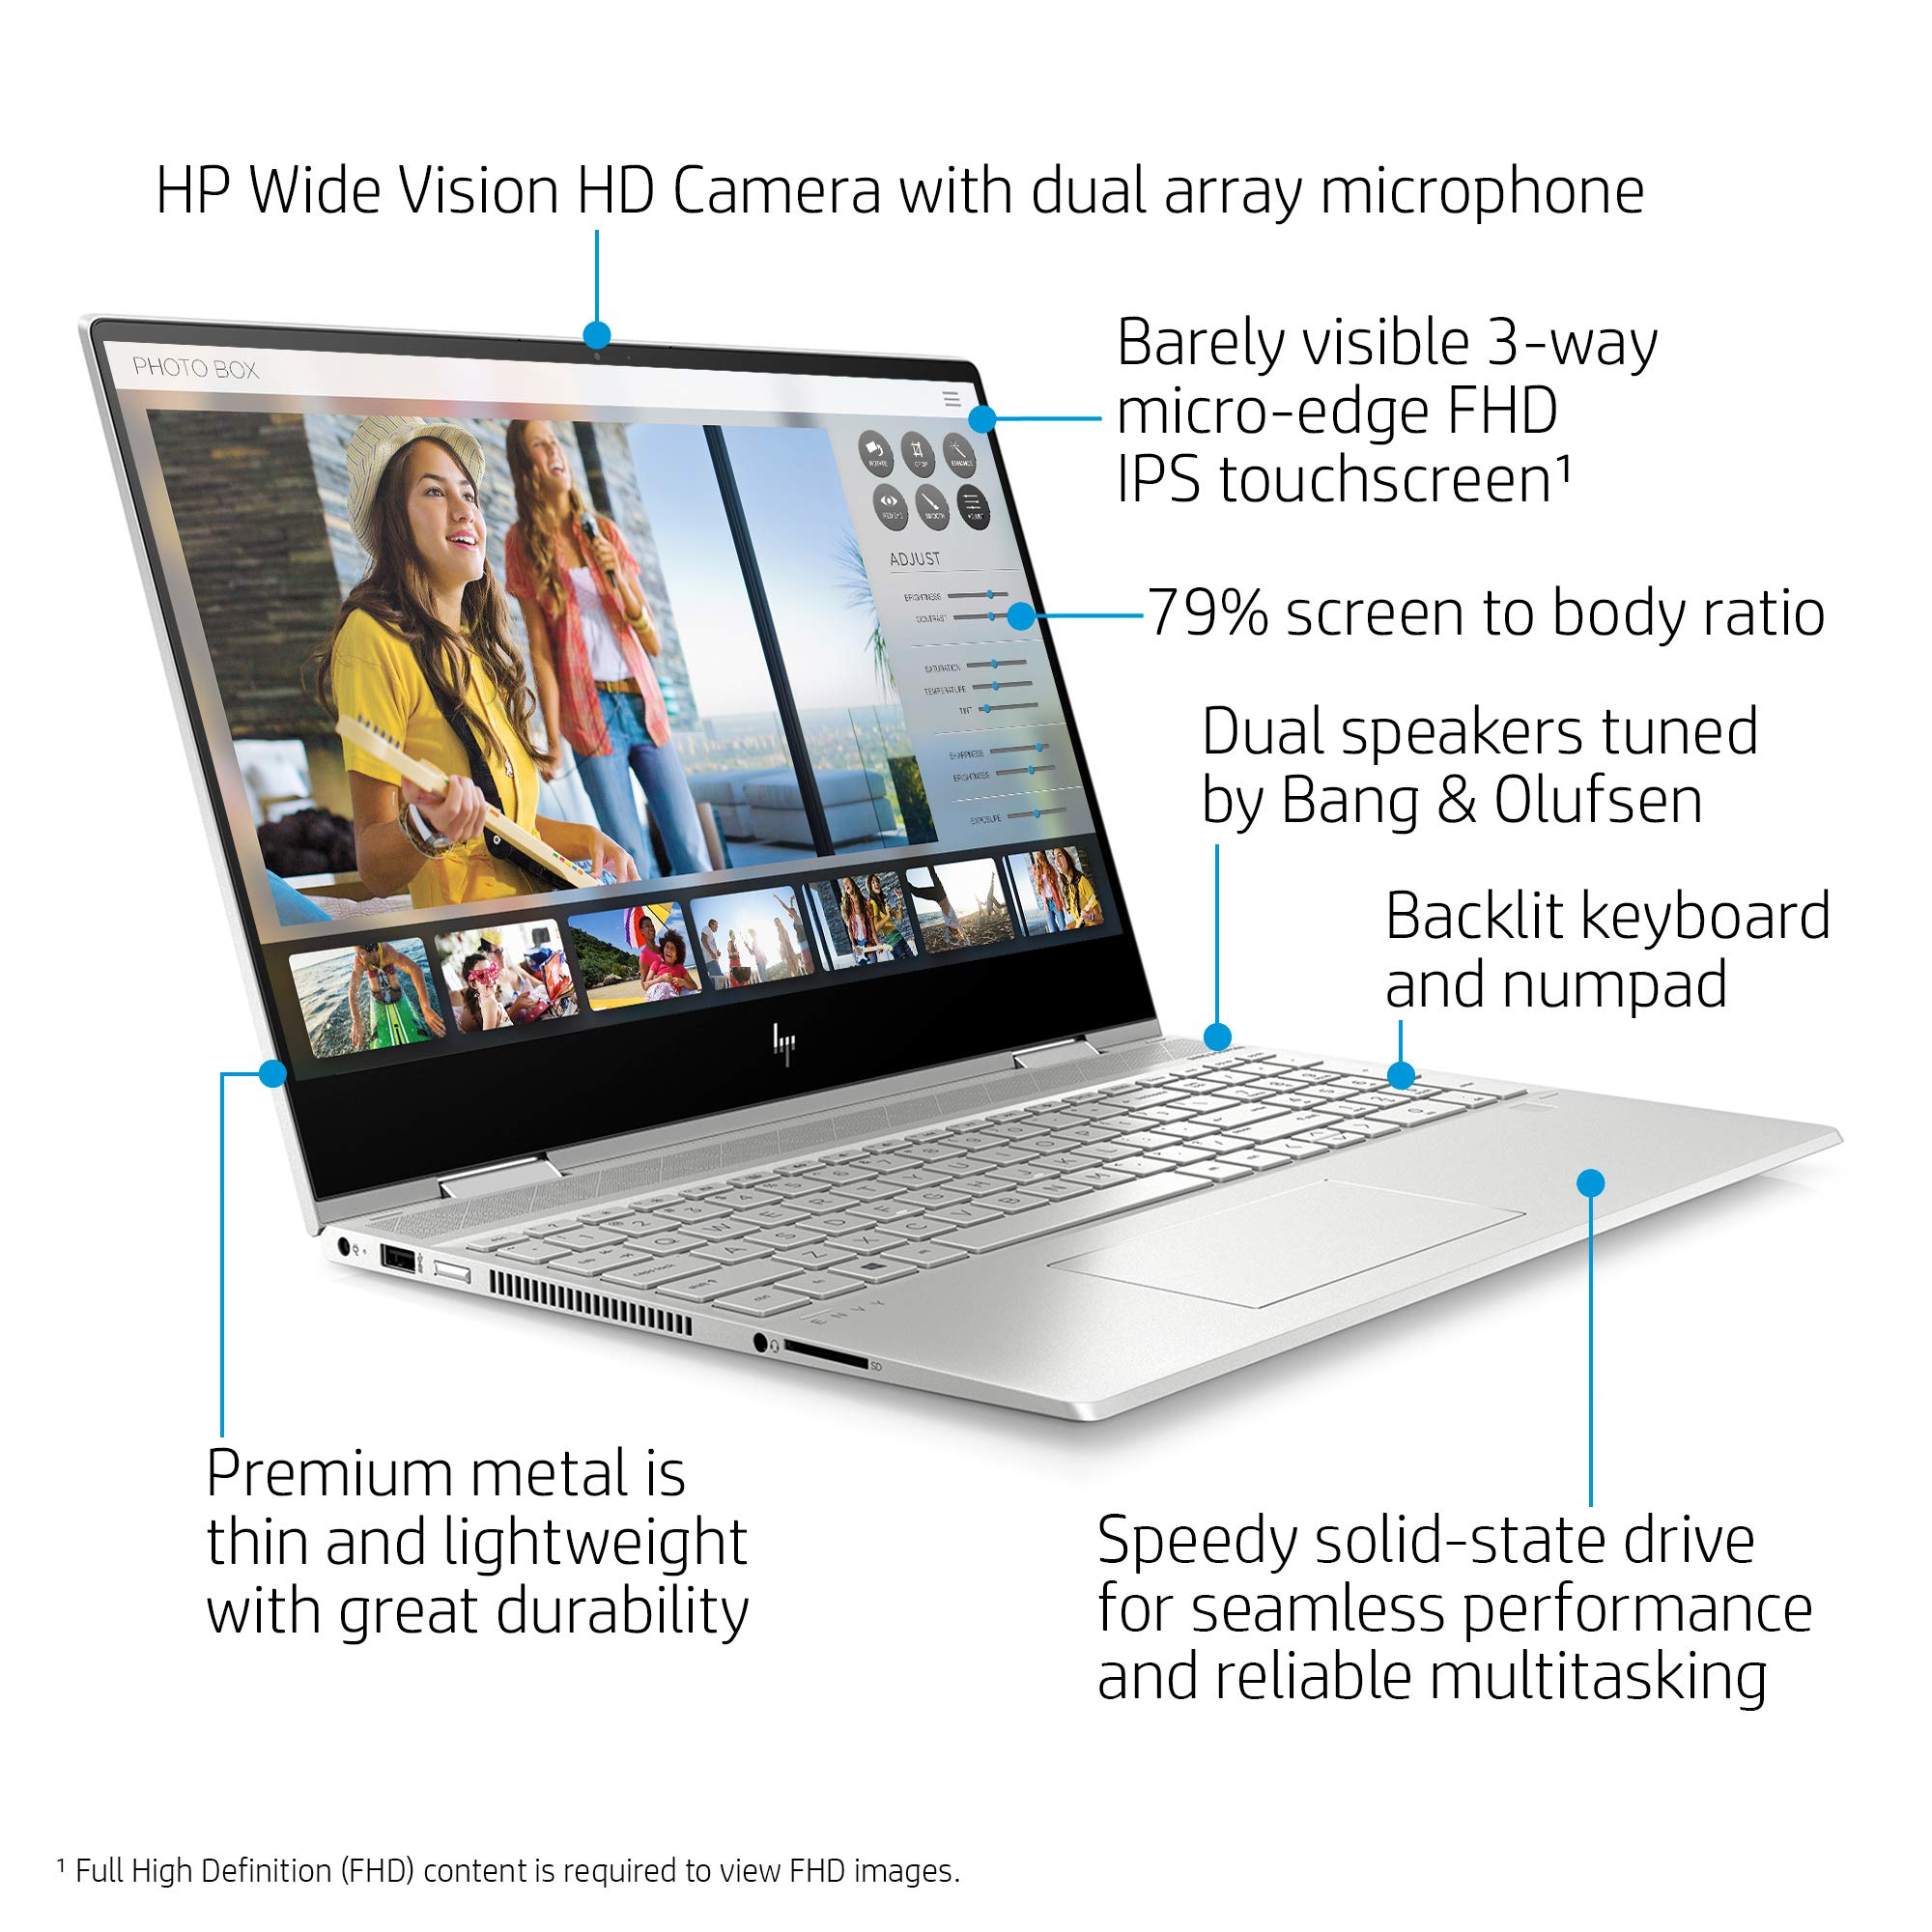 HP Envy x360 2 in 1 Laptop Computer I 15.6